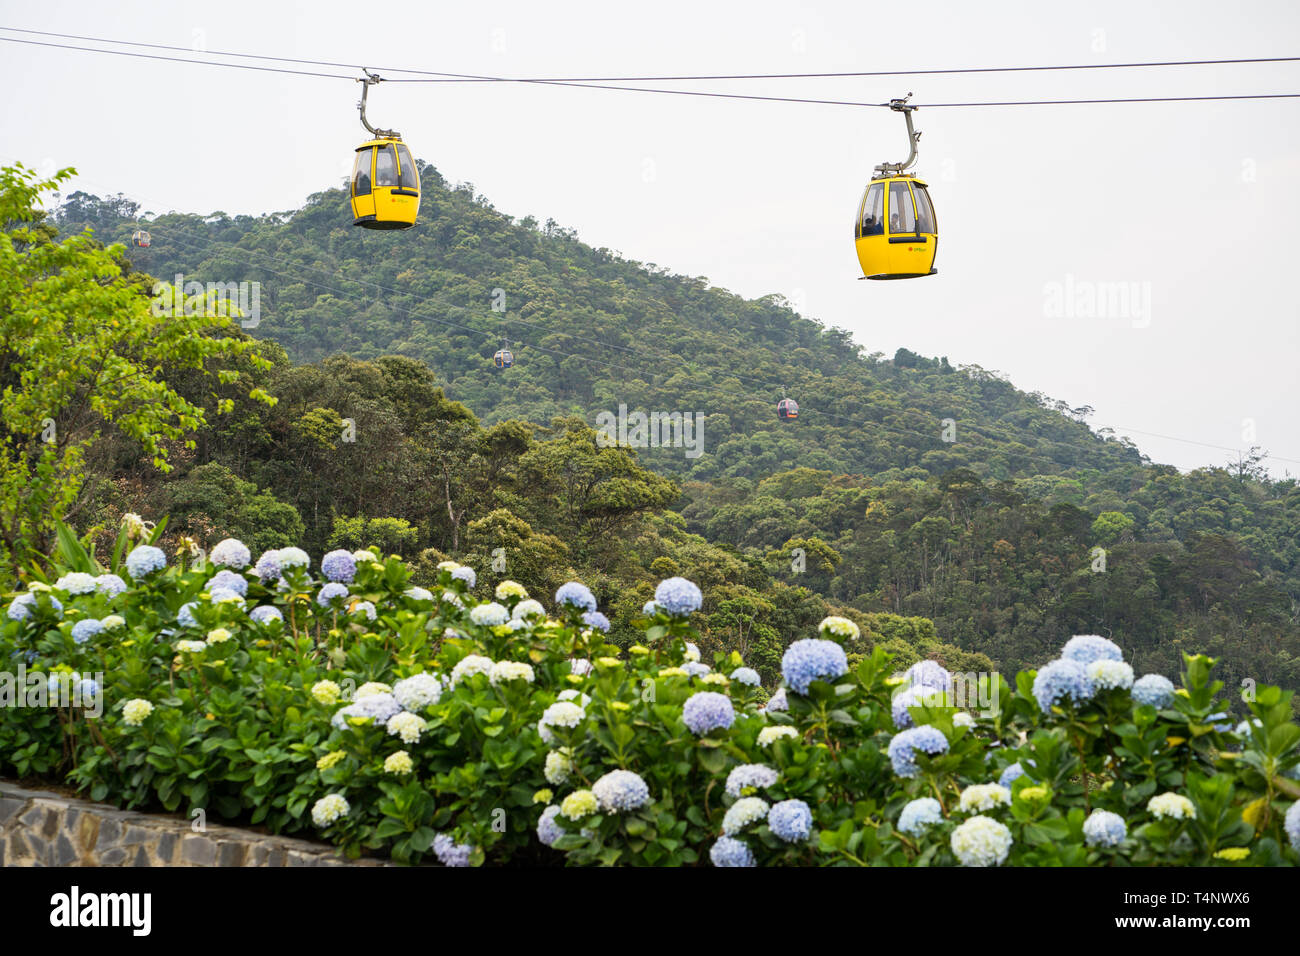 Da Nang, Vietnam - Apr 2, 2016: Cable car with flowers on foreground for transportation to Ba Na Hills site, 30km from Da Nang city Stock Photo